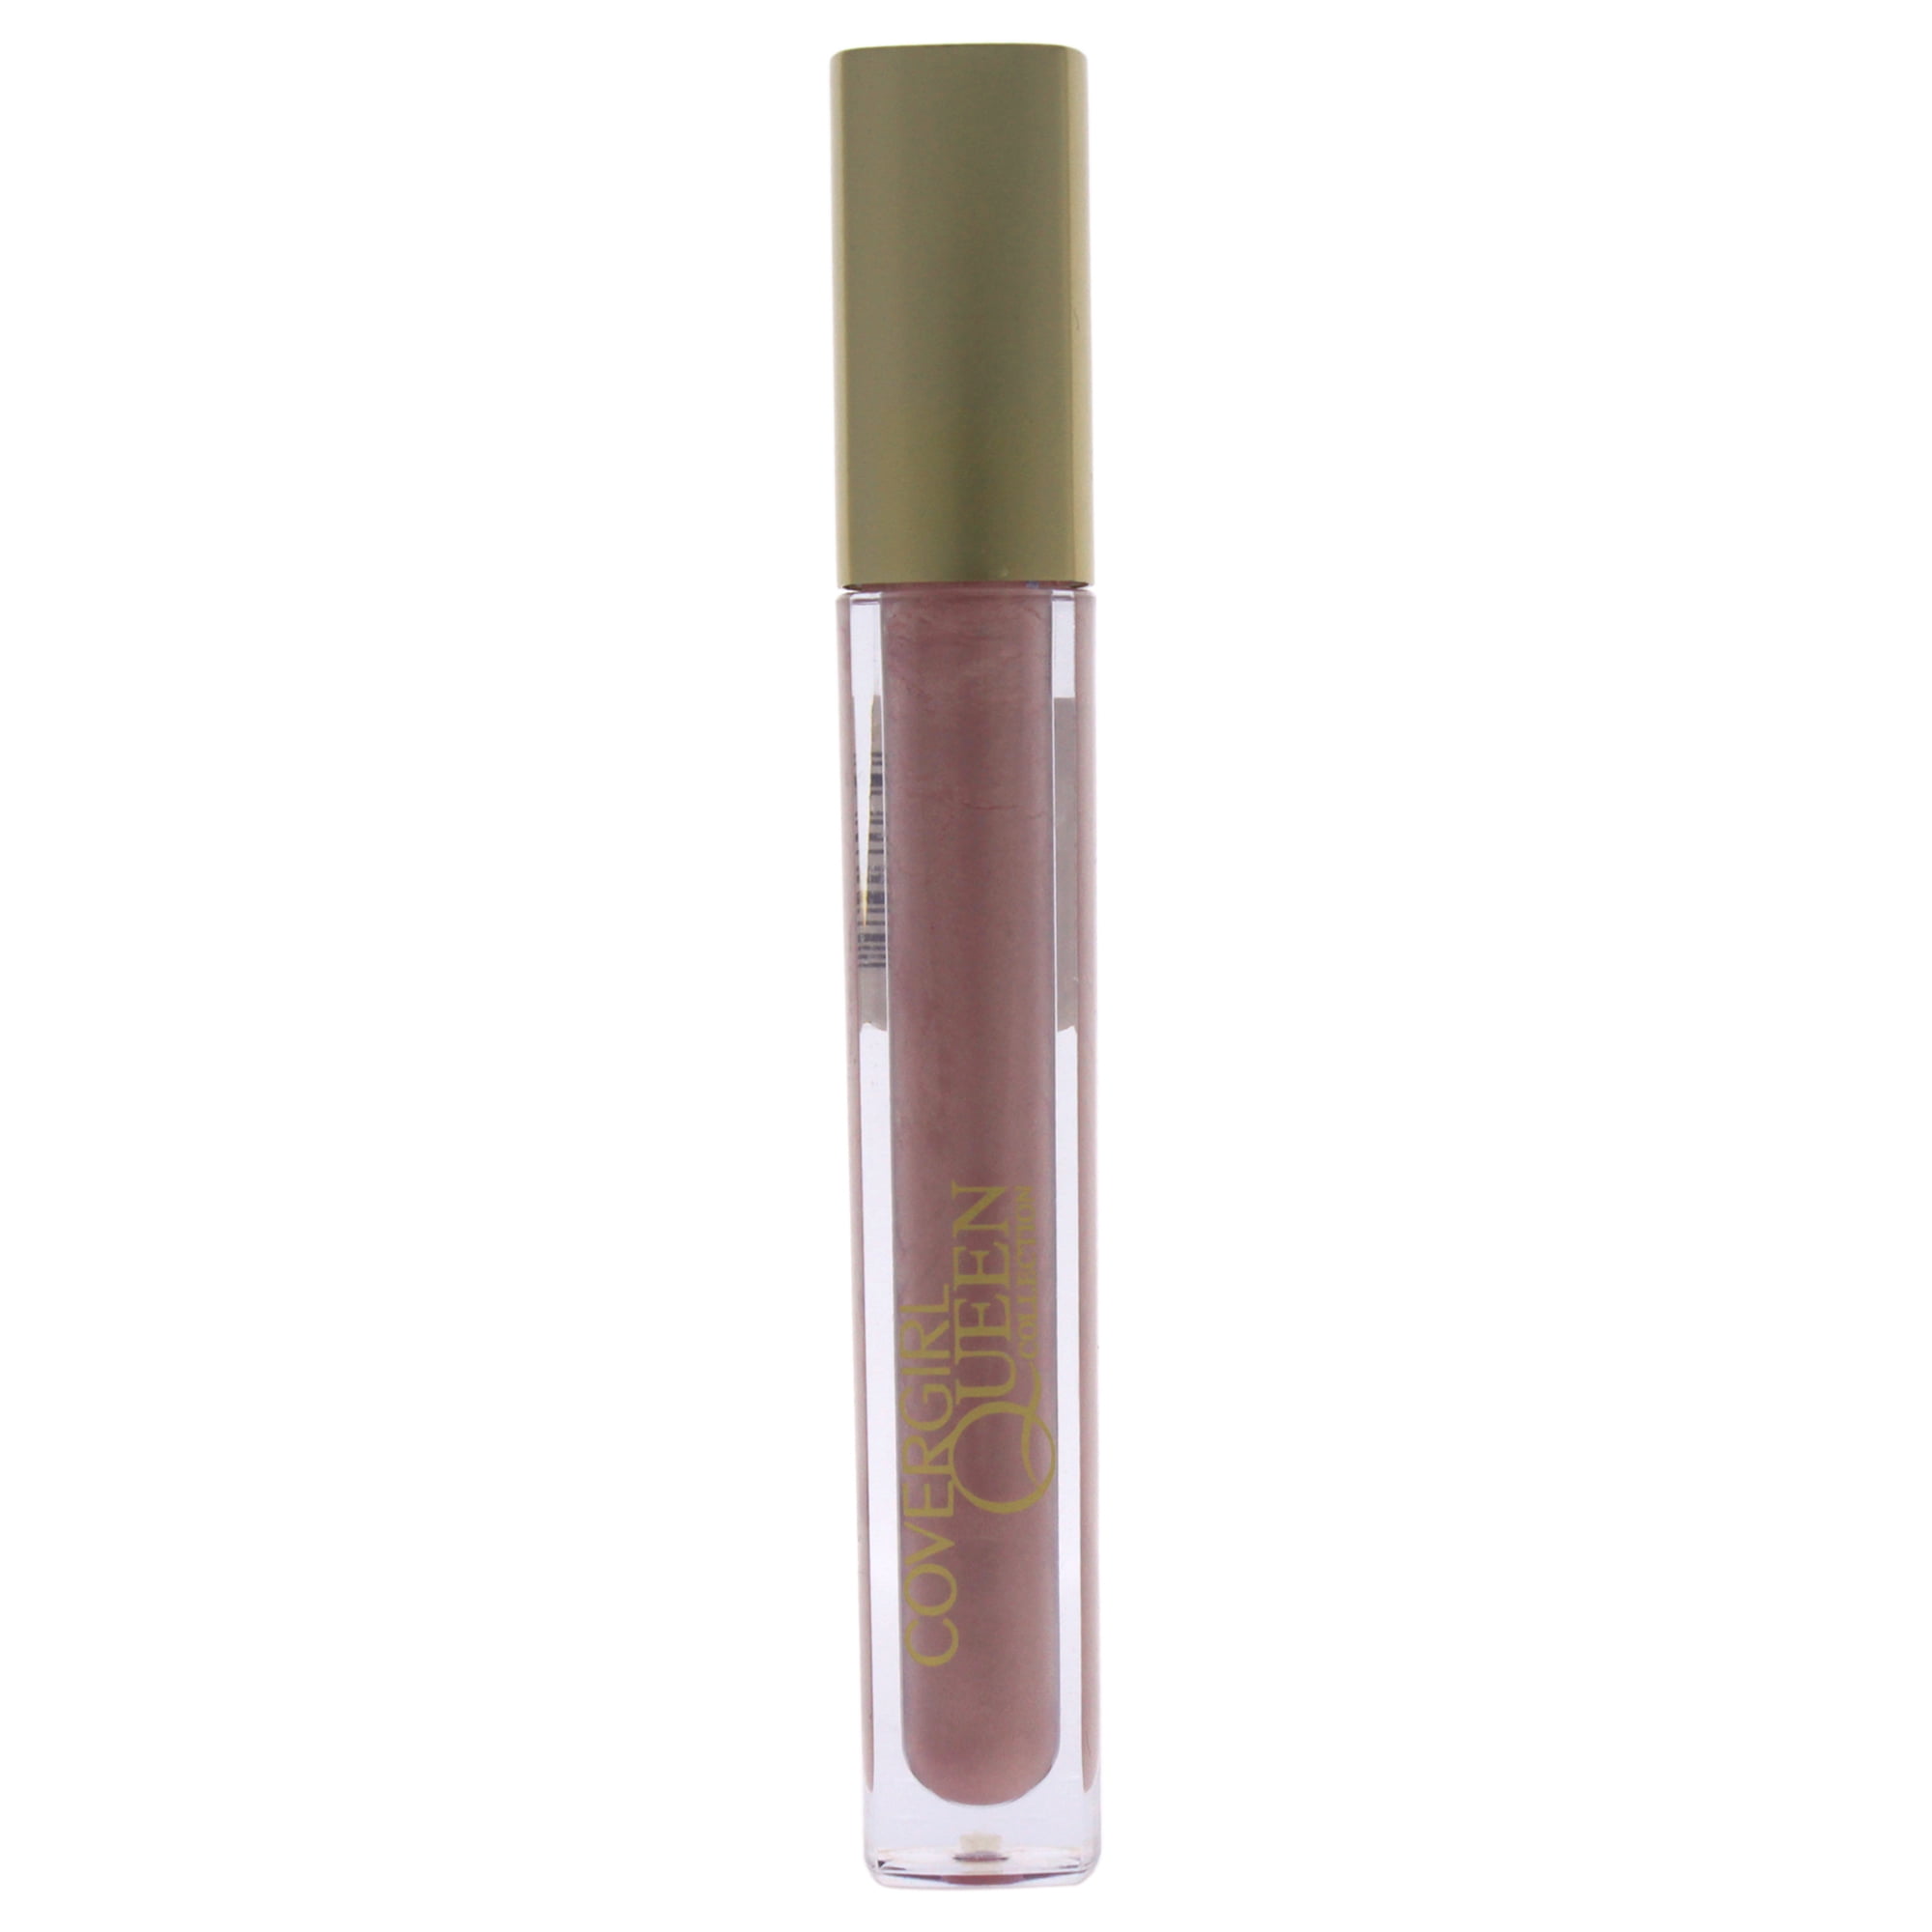 Queen Collection Colorlicious Gloss - # Q600 Premier Pink by CoverGirl ...